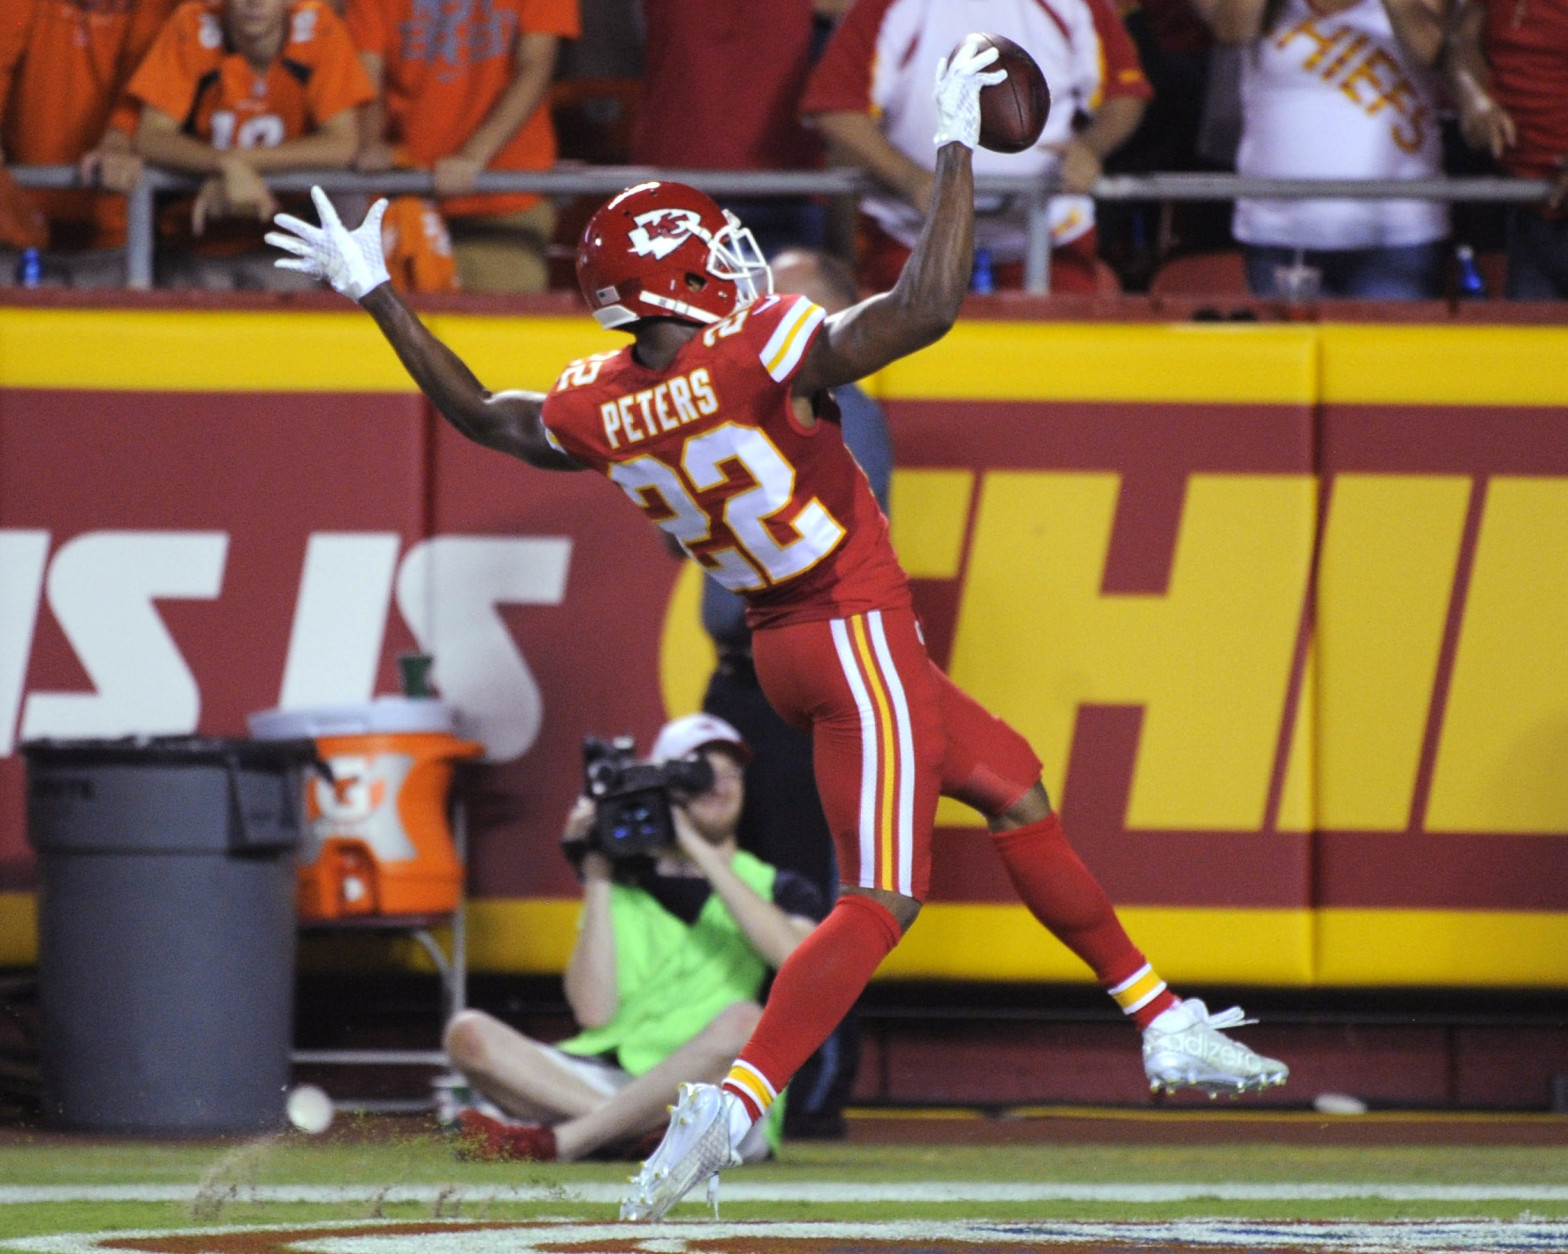 Kansas City Chiefs defensive back Marcus Peters (22) celebrates his interception of a pass by Denver Broncos quarterback Peyton Manning for a touchdown during the first half of an NFL football game in Kansas City, Mo., Thursday, Sept. 17, 2015. (AP Photo/Ed Zurga)